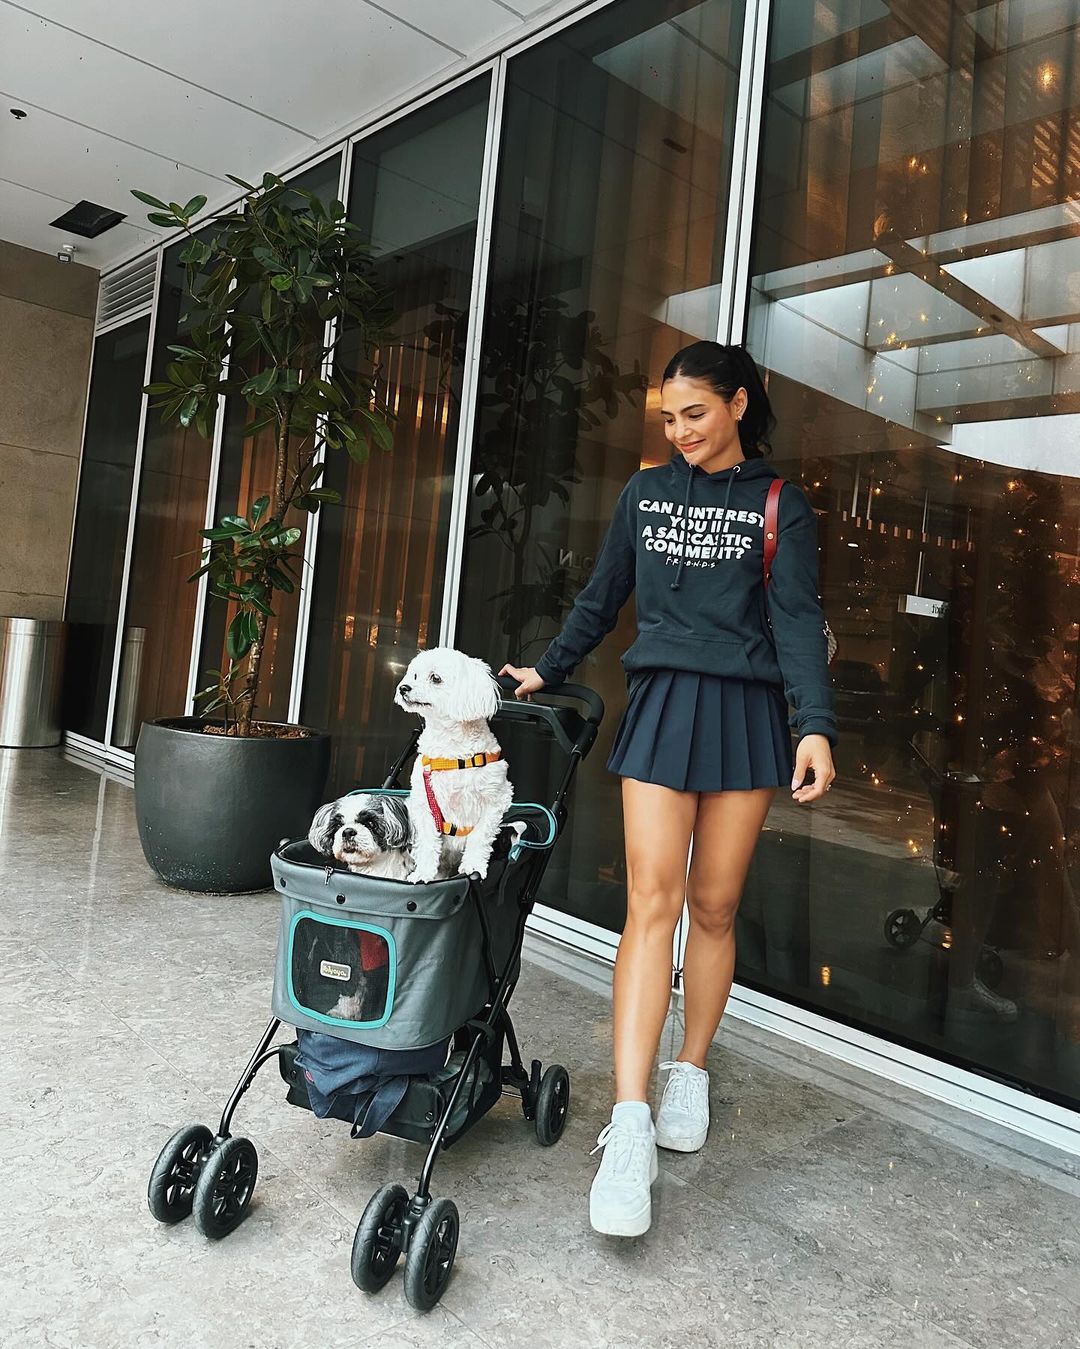 Lovi Poe with her dogs